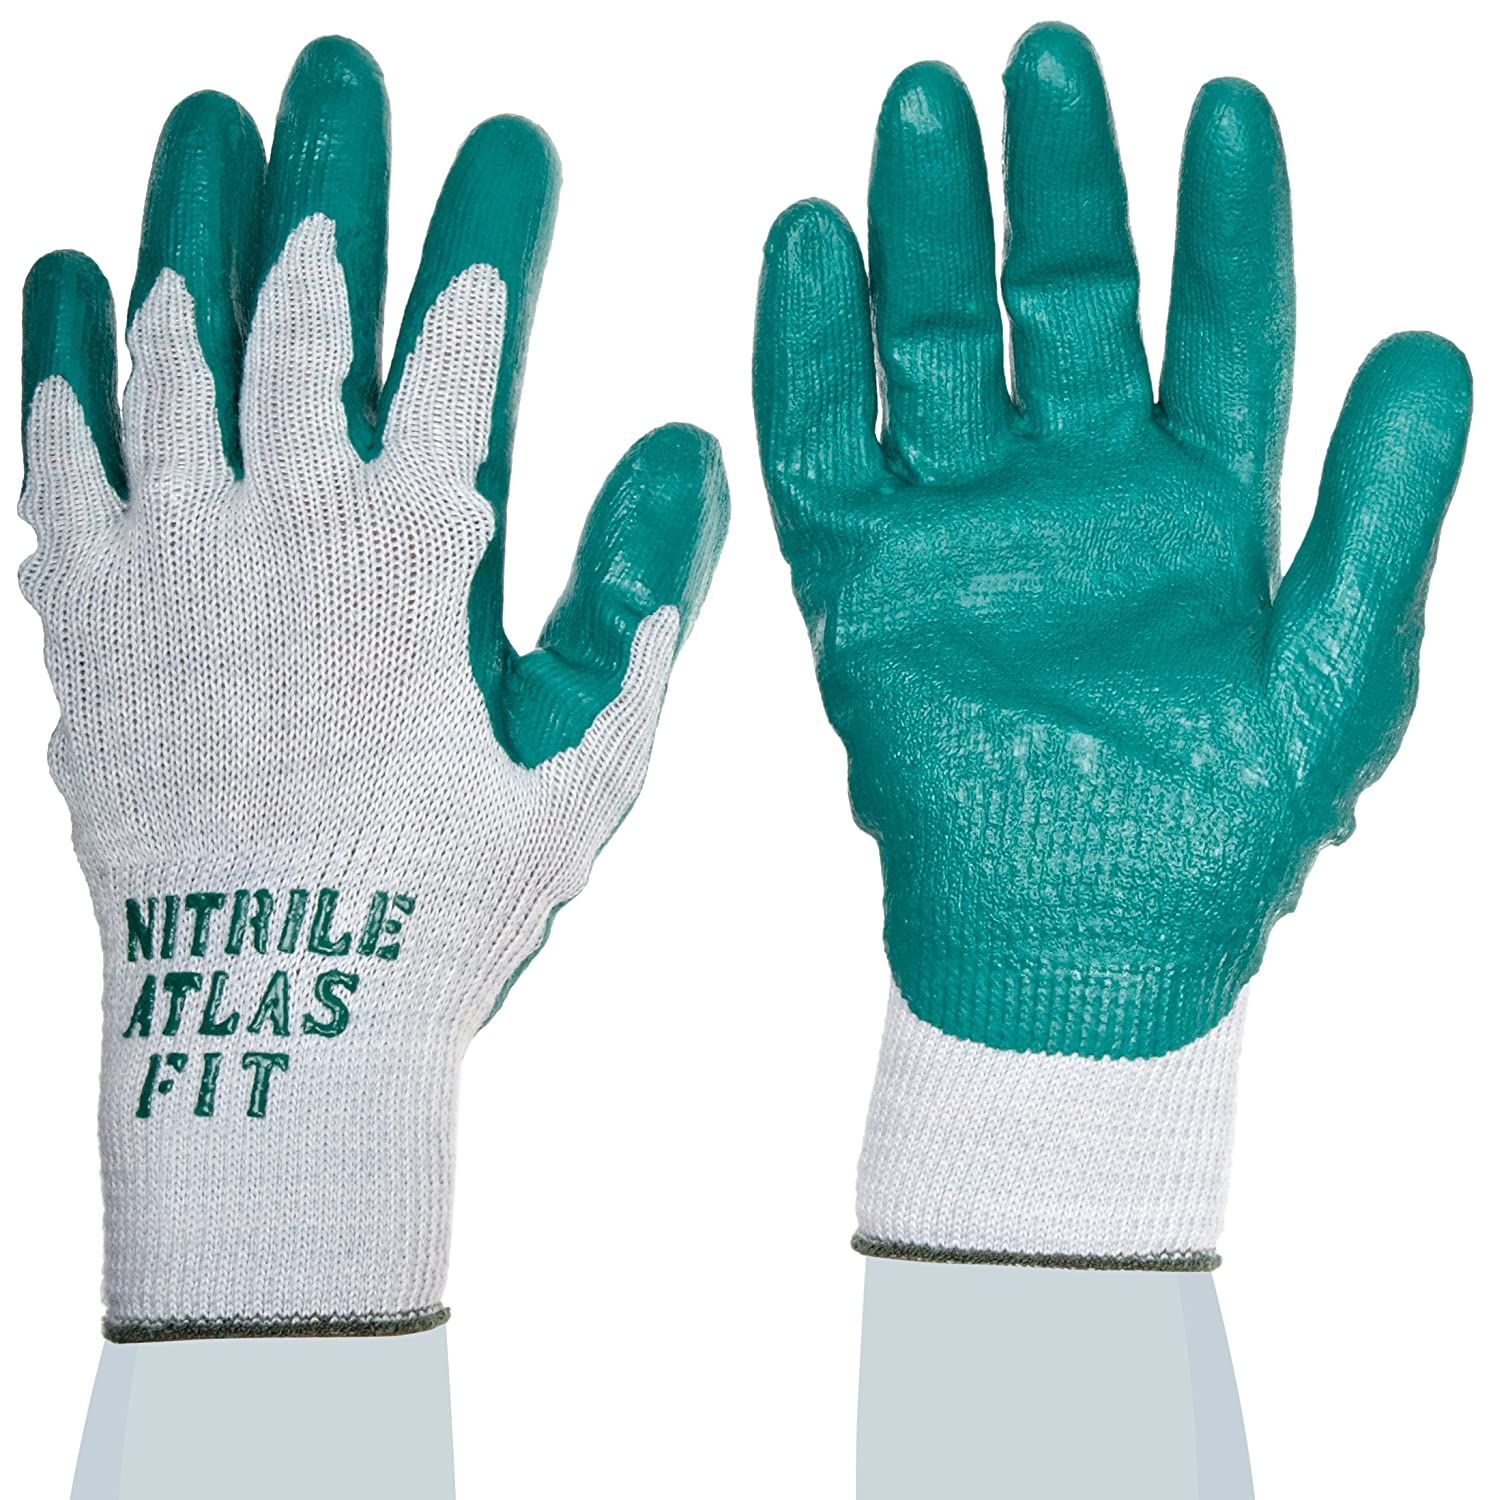 Nitrile palm coating,  Hi vis yellow/green coating, 10 gauge seamless cut resistant liner made with polyester/stainless steel, Hagane Coil™ Technology, medium, ANSI CUT LEVEL A4